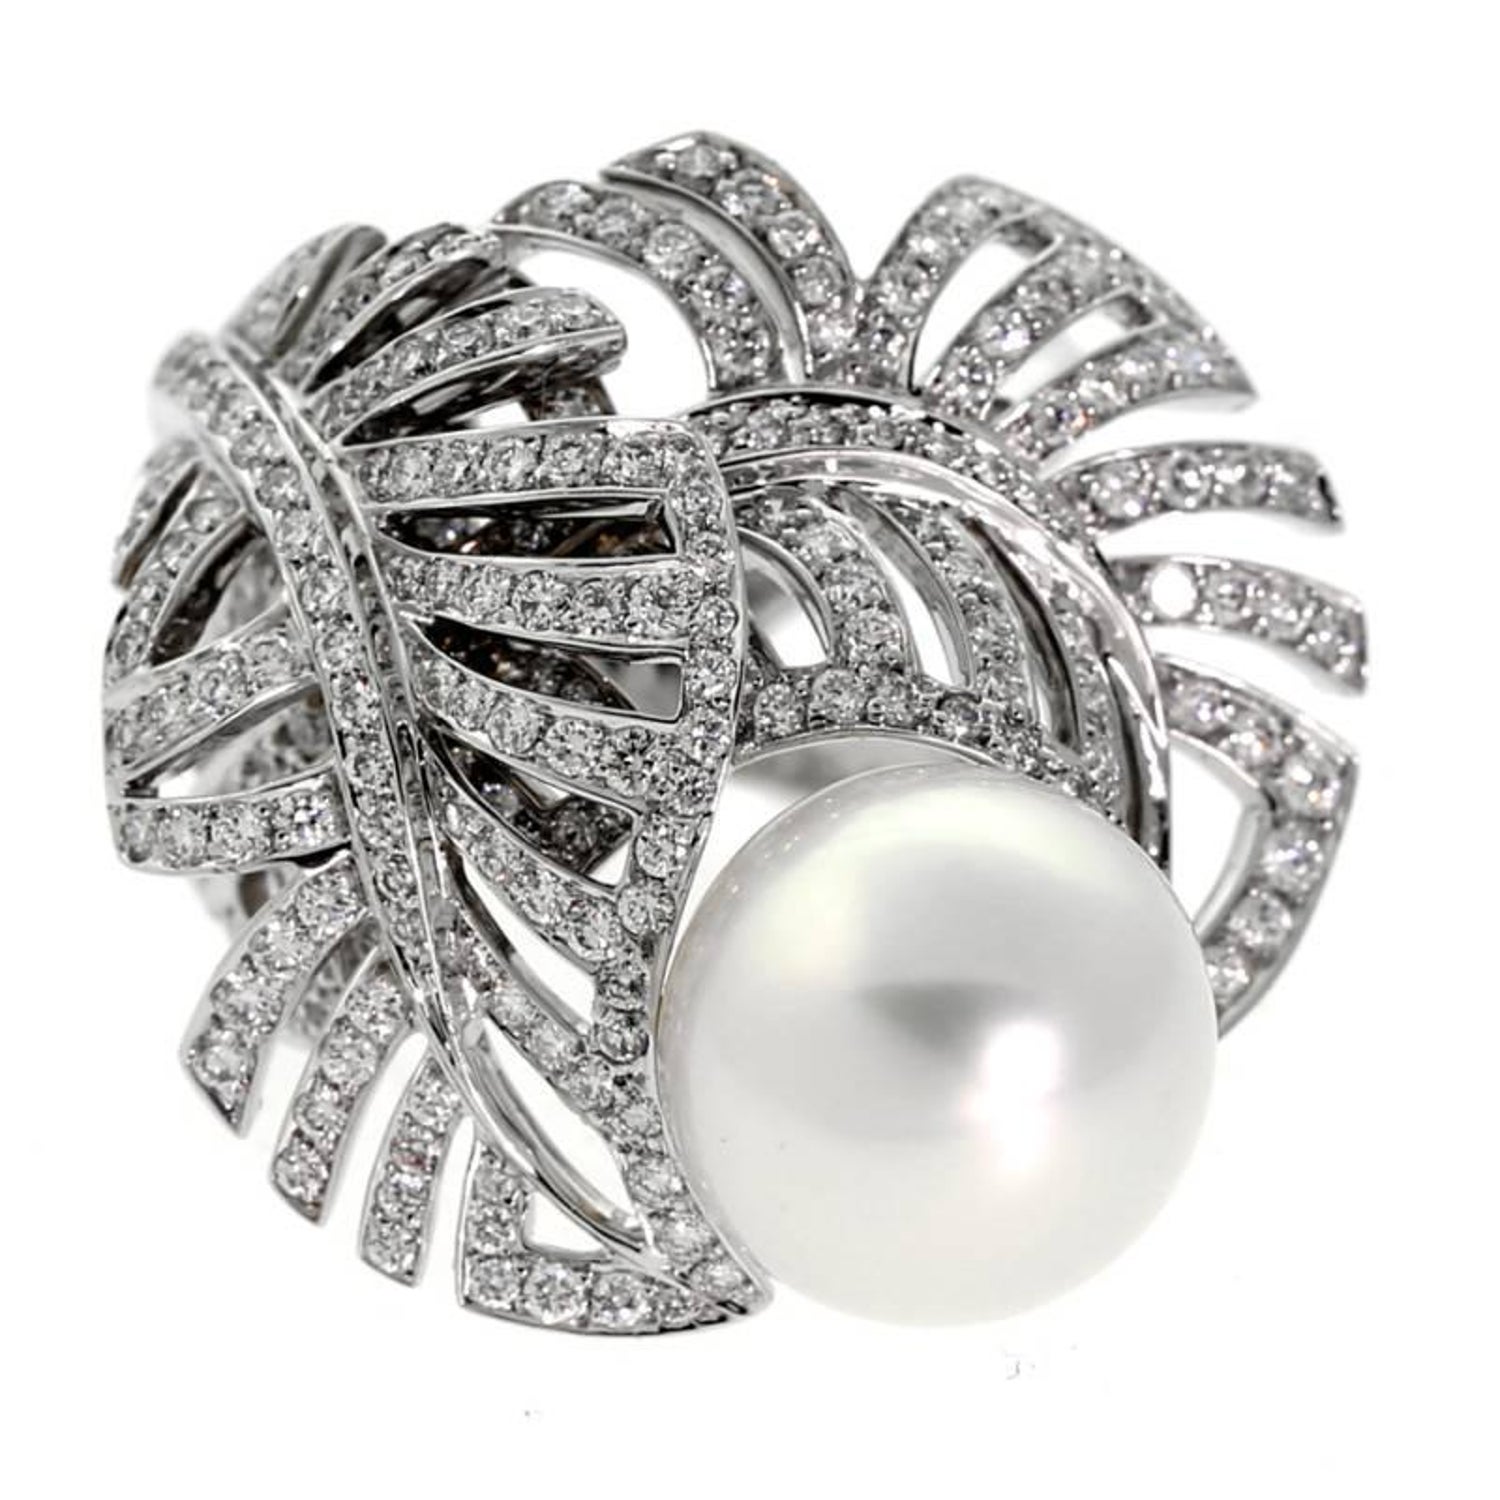 CHANEL “Ultra” ring in white gold, ceramic and diamonds